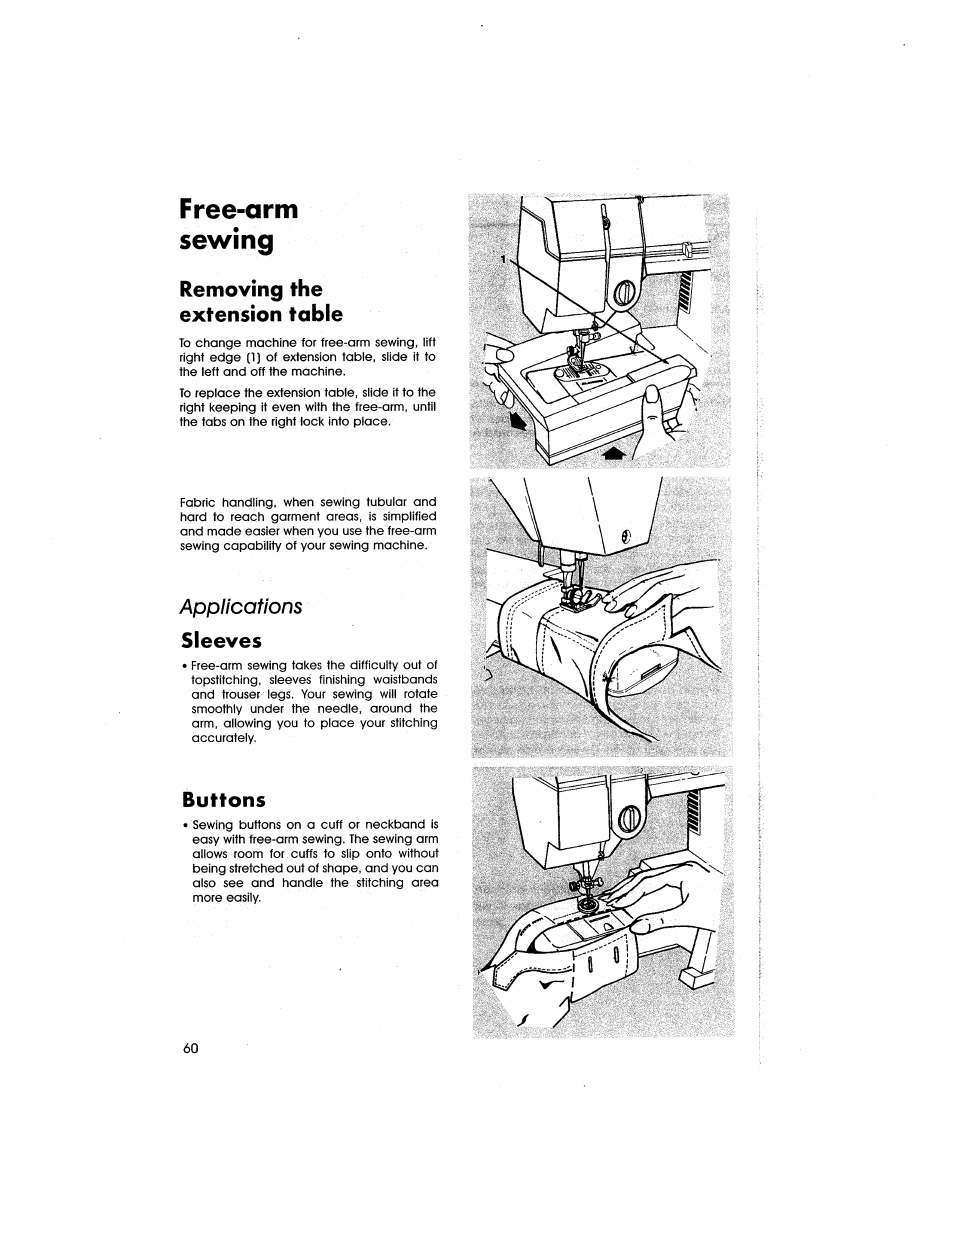 Free-arm, Sewing, Removing the extension table | Sleeves, Buttons, Applications, Free-arm sewing | SINGER 5805 User Manual | Page 62 / 88